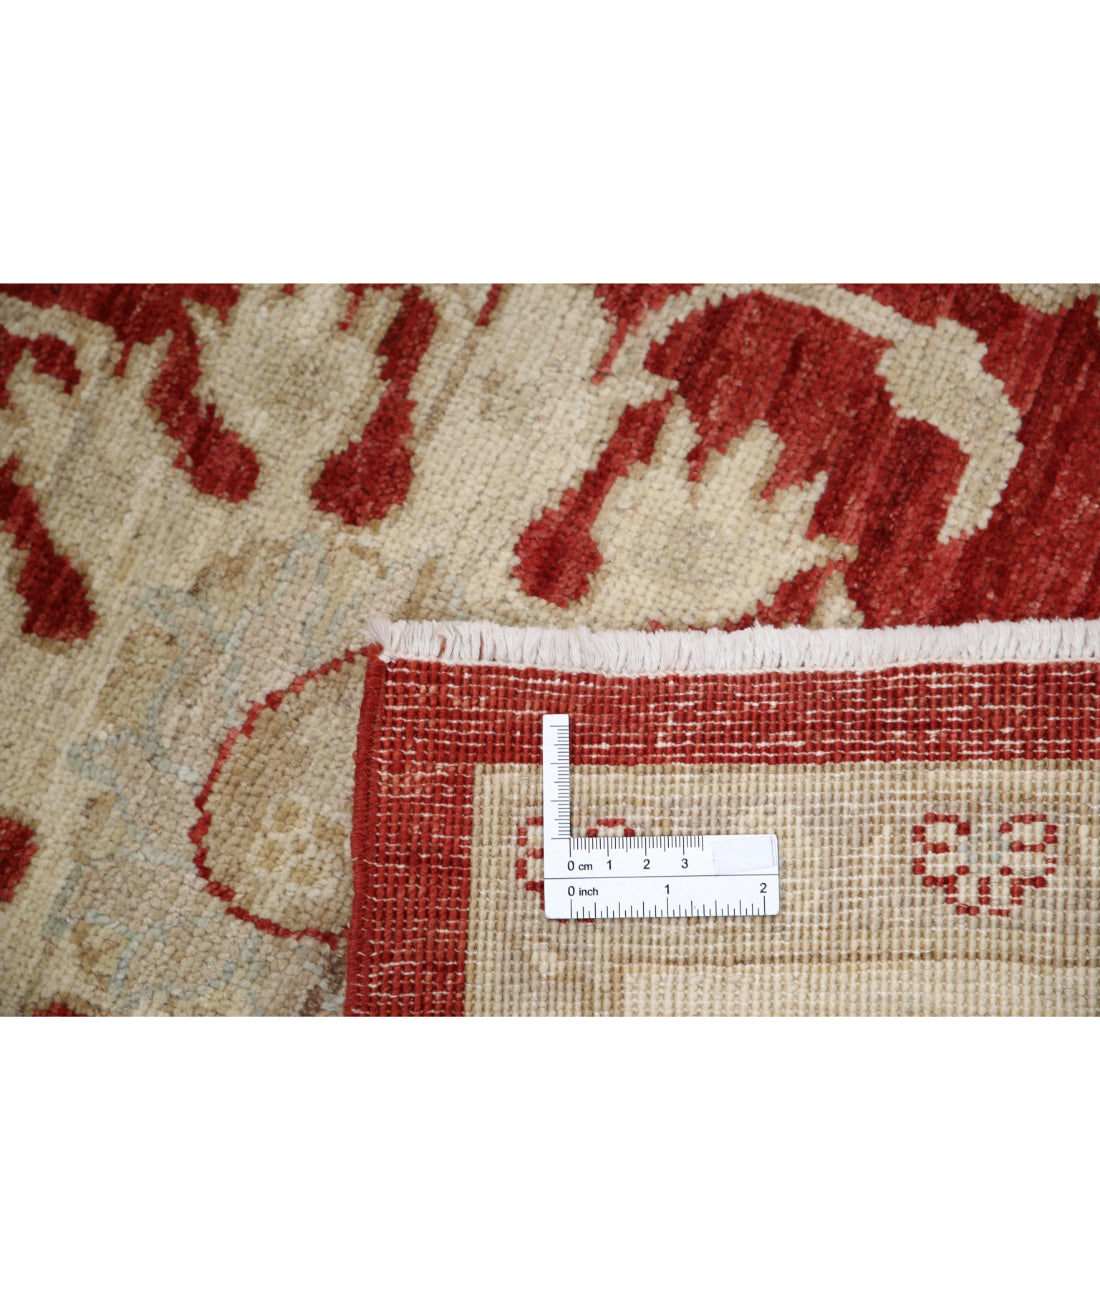 Ziegler 5'5'' X 8'6'' Hand-Knotted Wool Rug 5'5'' x 8'6'' (163 X 255) / Red / Ivory